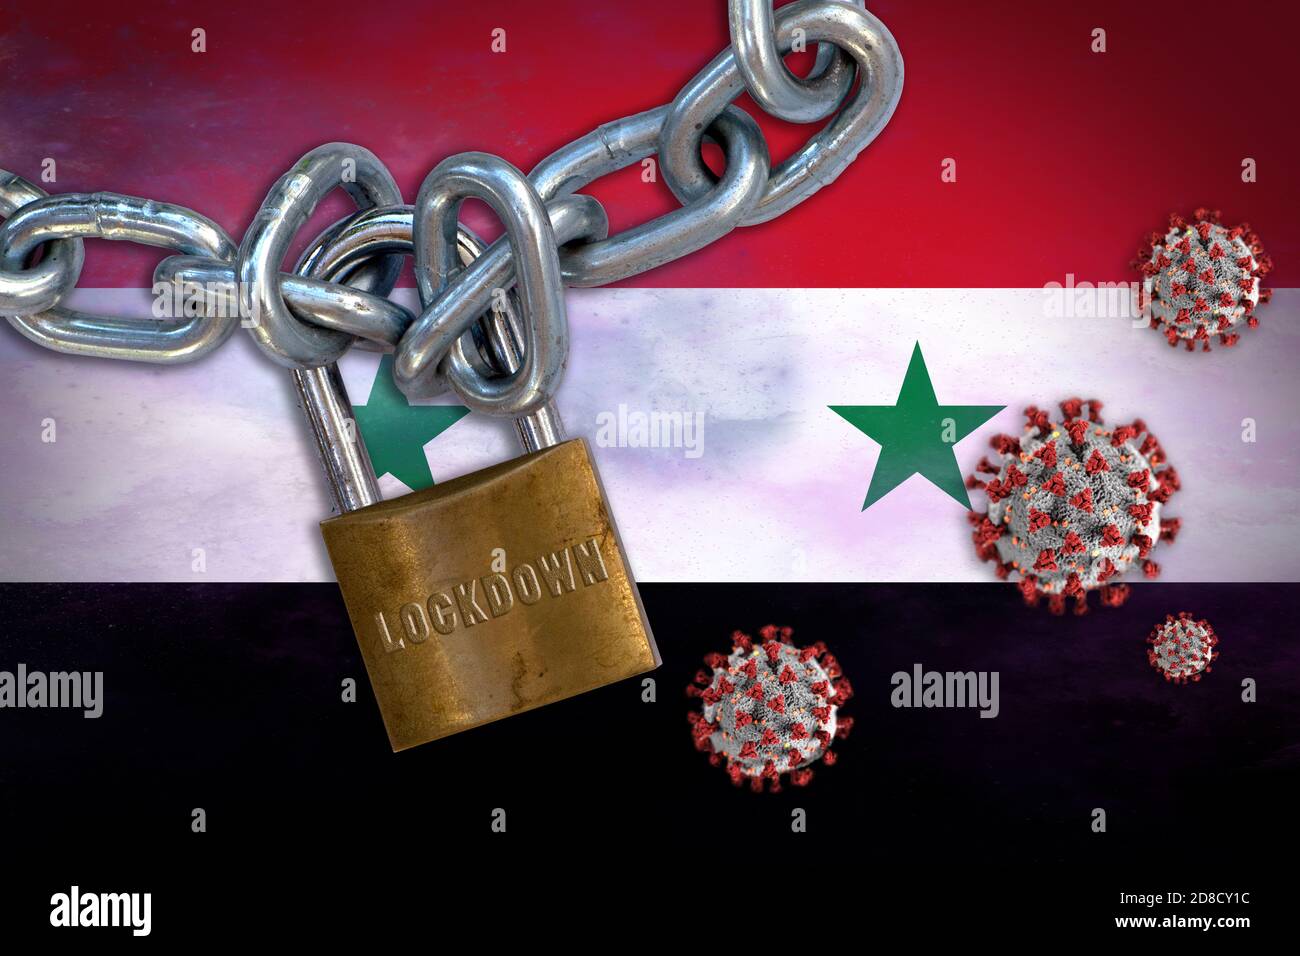 Concept illustration of Coronavirus lockdown in Syria, with Covid-19 particles overshadowing flag of Syria. Stock Photo